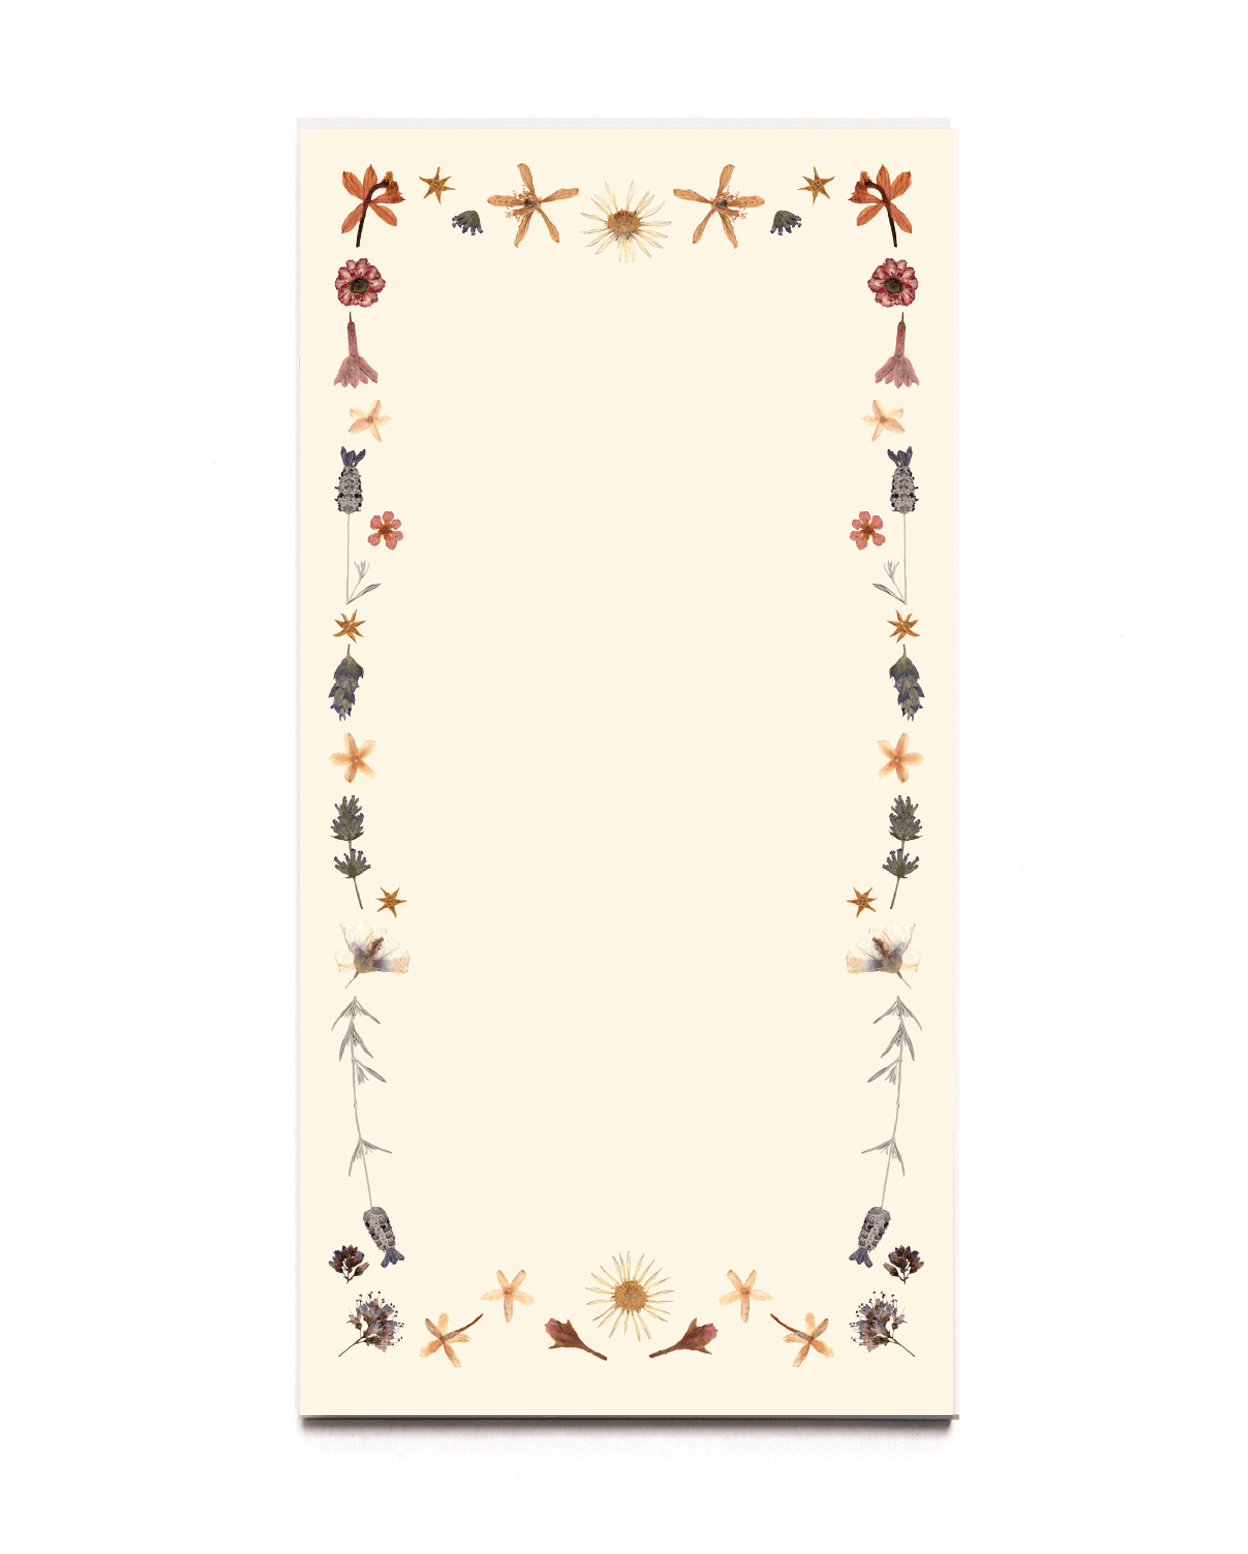 Various pressed flowers line each side of the notepad. Printed on cream colored paper.